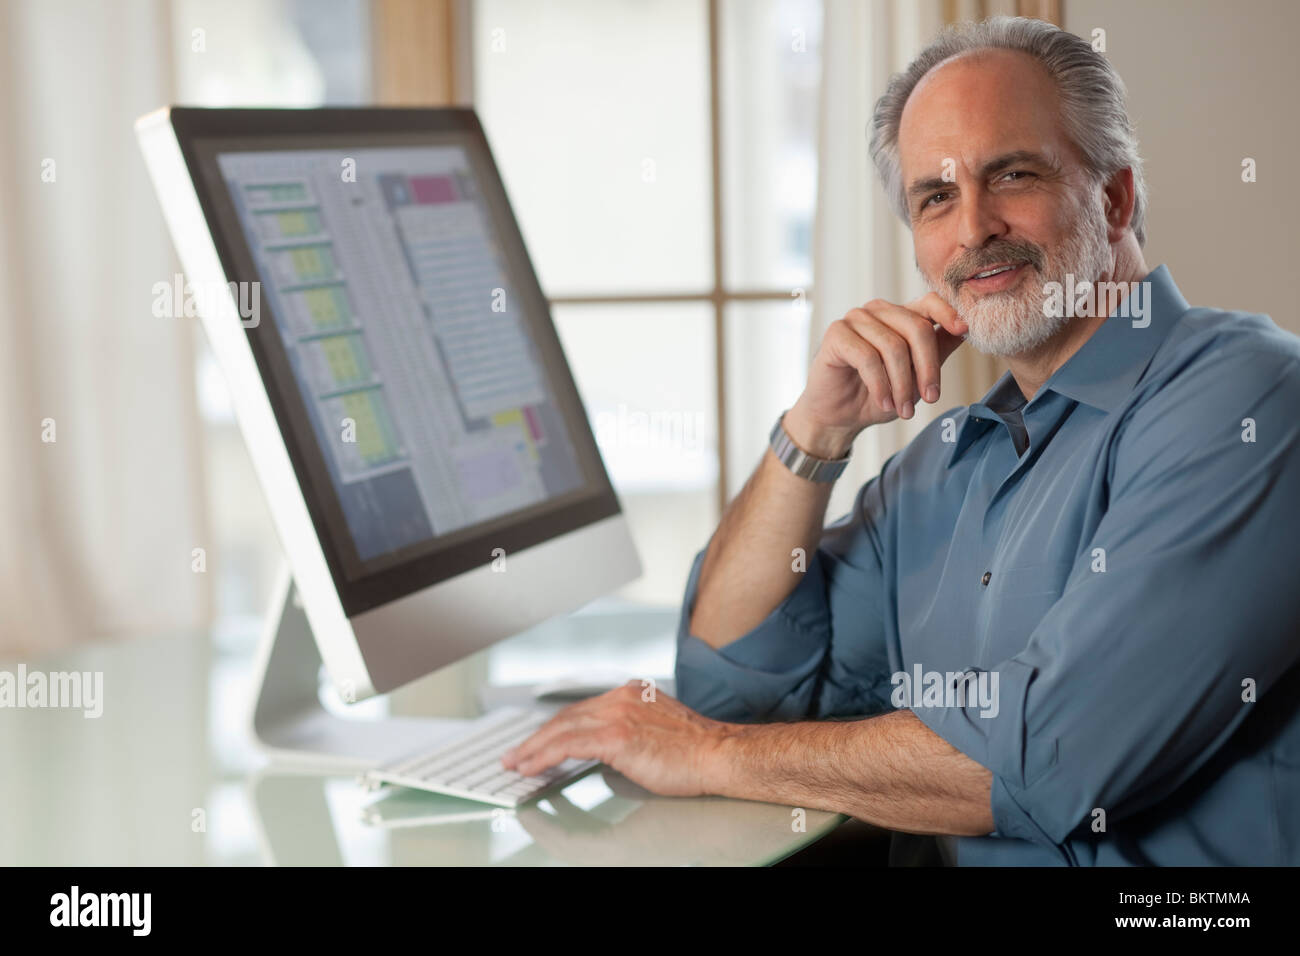 Portrait of a businessman dressed in casual clothing and sitting in front of a computer. He is smiling at the camera. Stock Photo